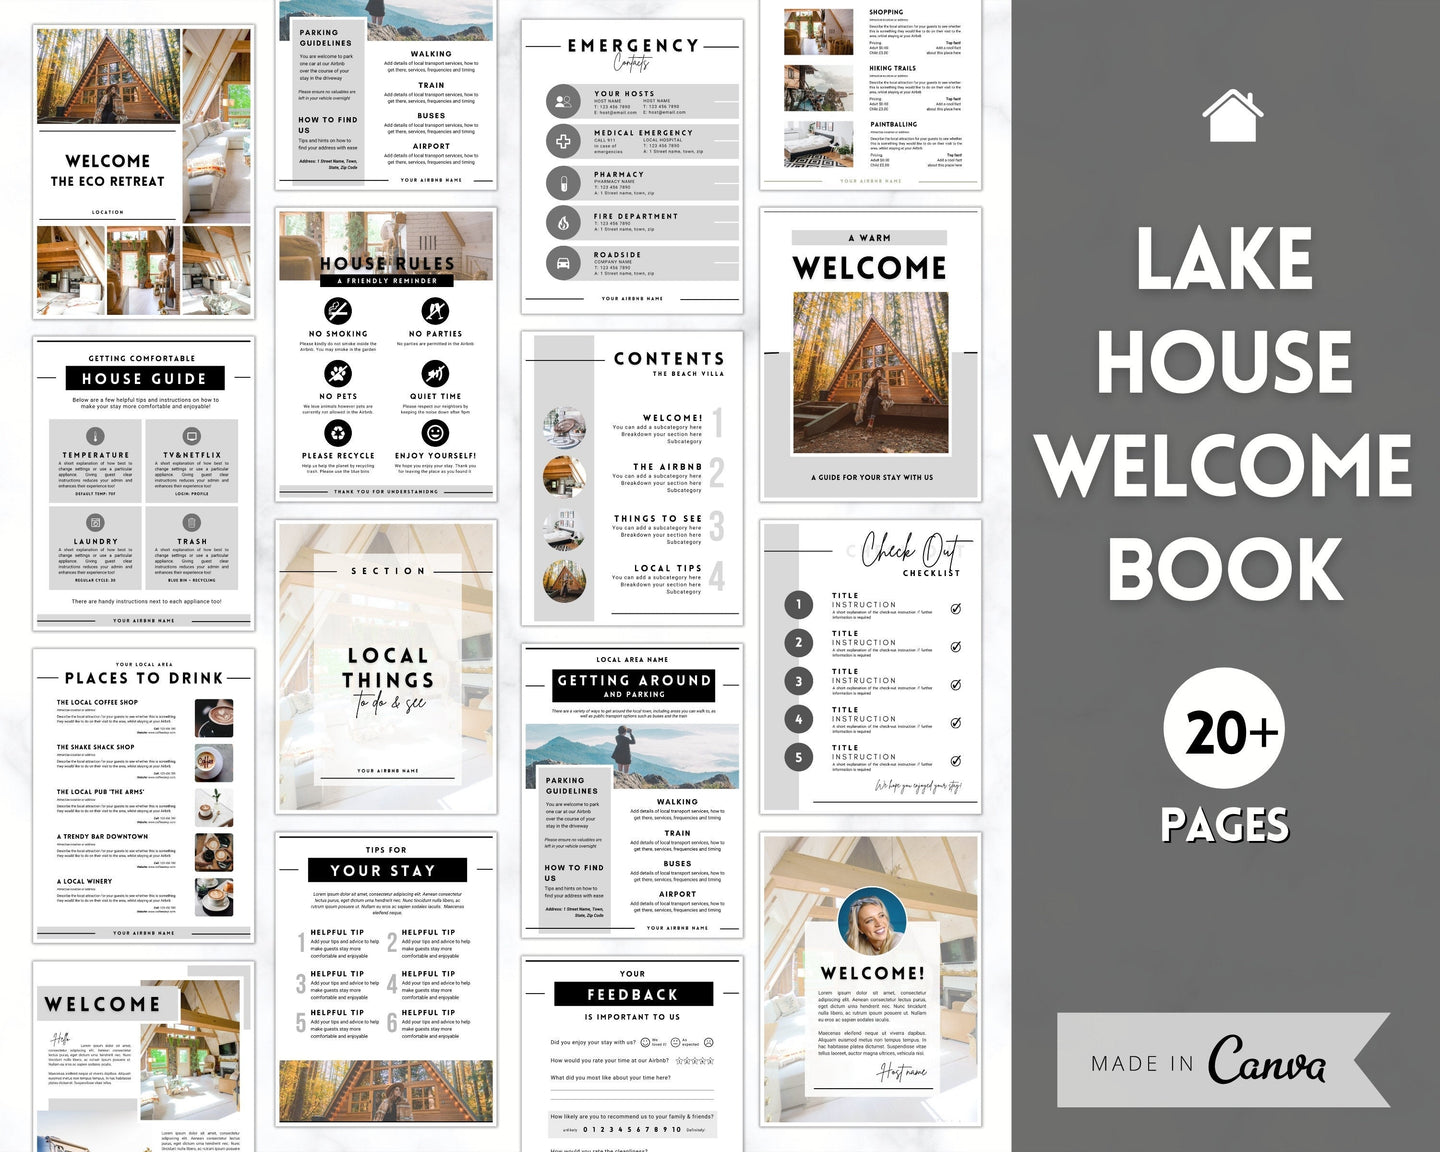 Lake House Welcome Book Template, Editable Canva Airbnb Welcome Guide, Air bnb House manual eBook, Host signs, Signage, VRBO Vacation Rental | Mono